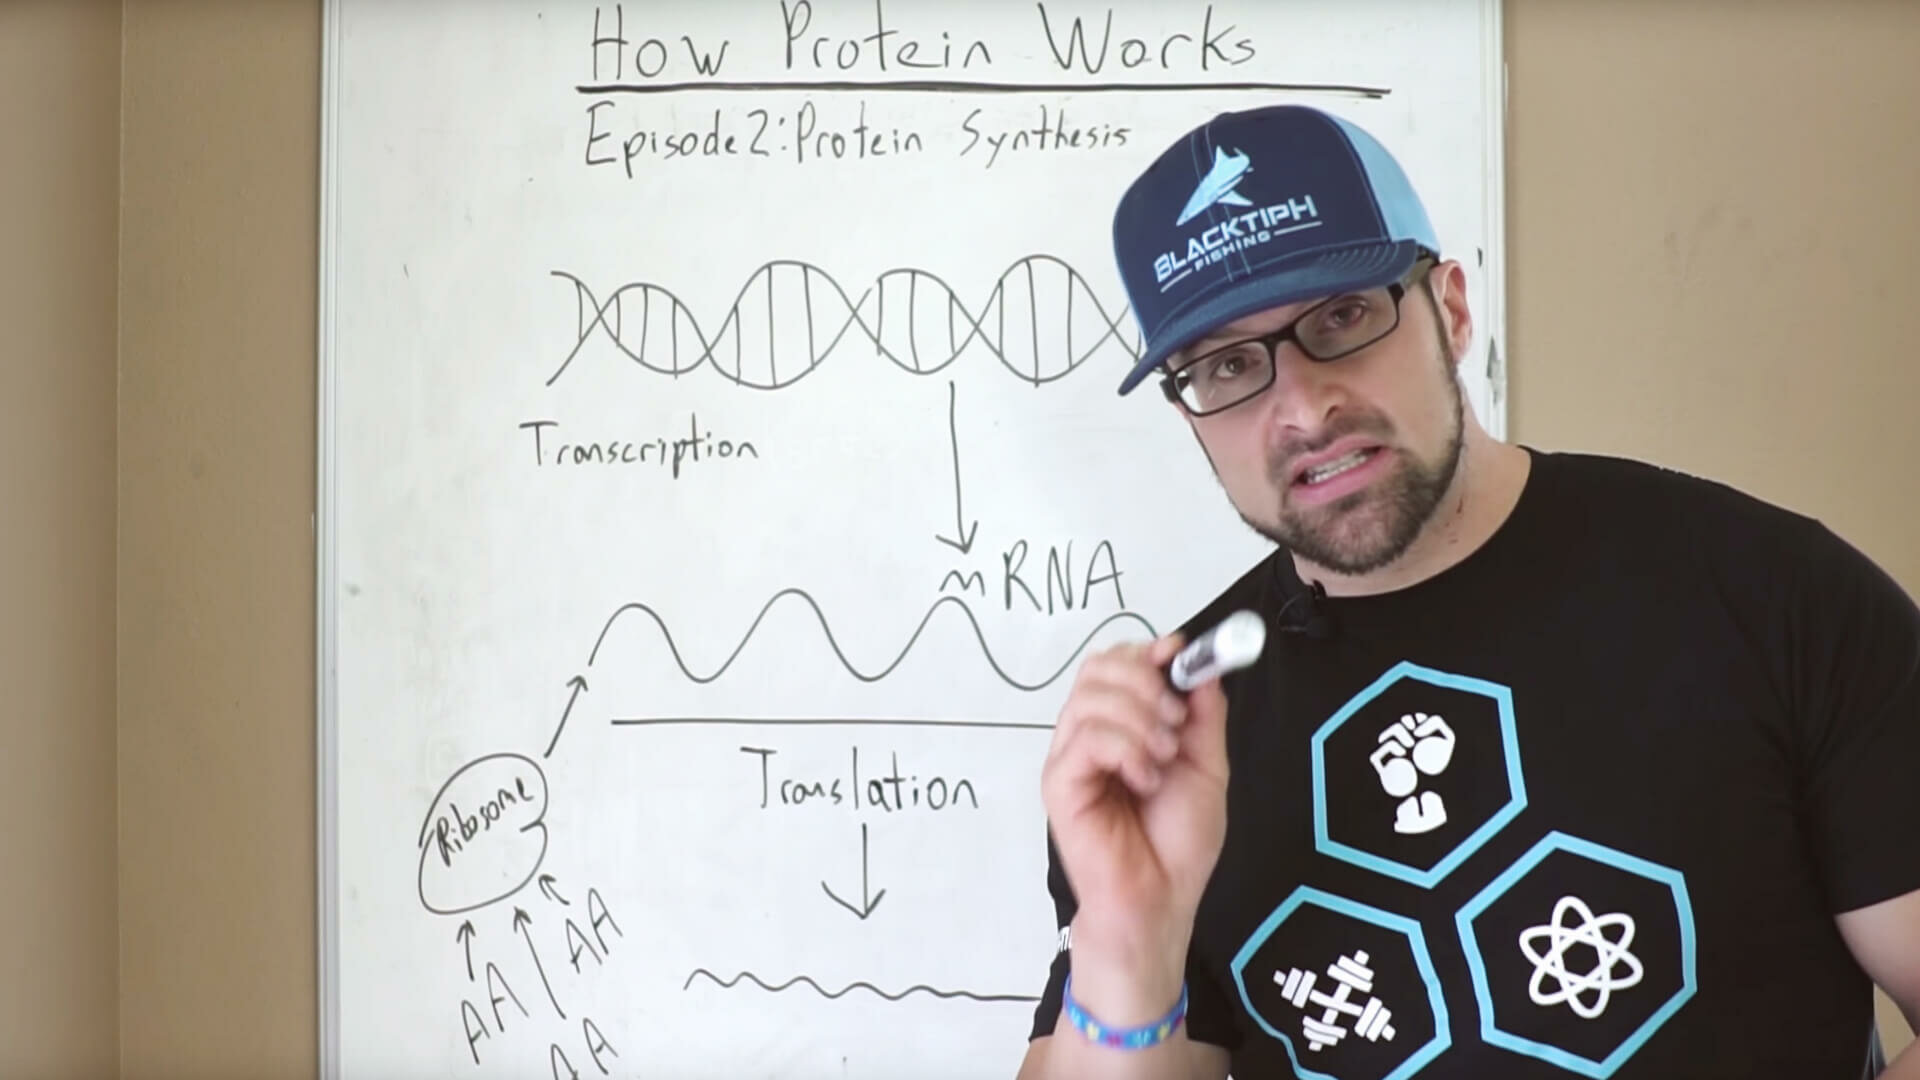 How Protein Works - Episode 2: Protein Synthesis